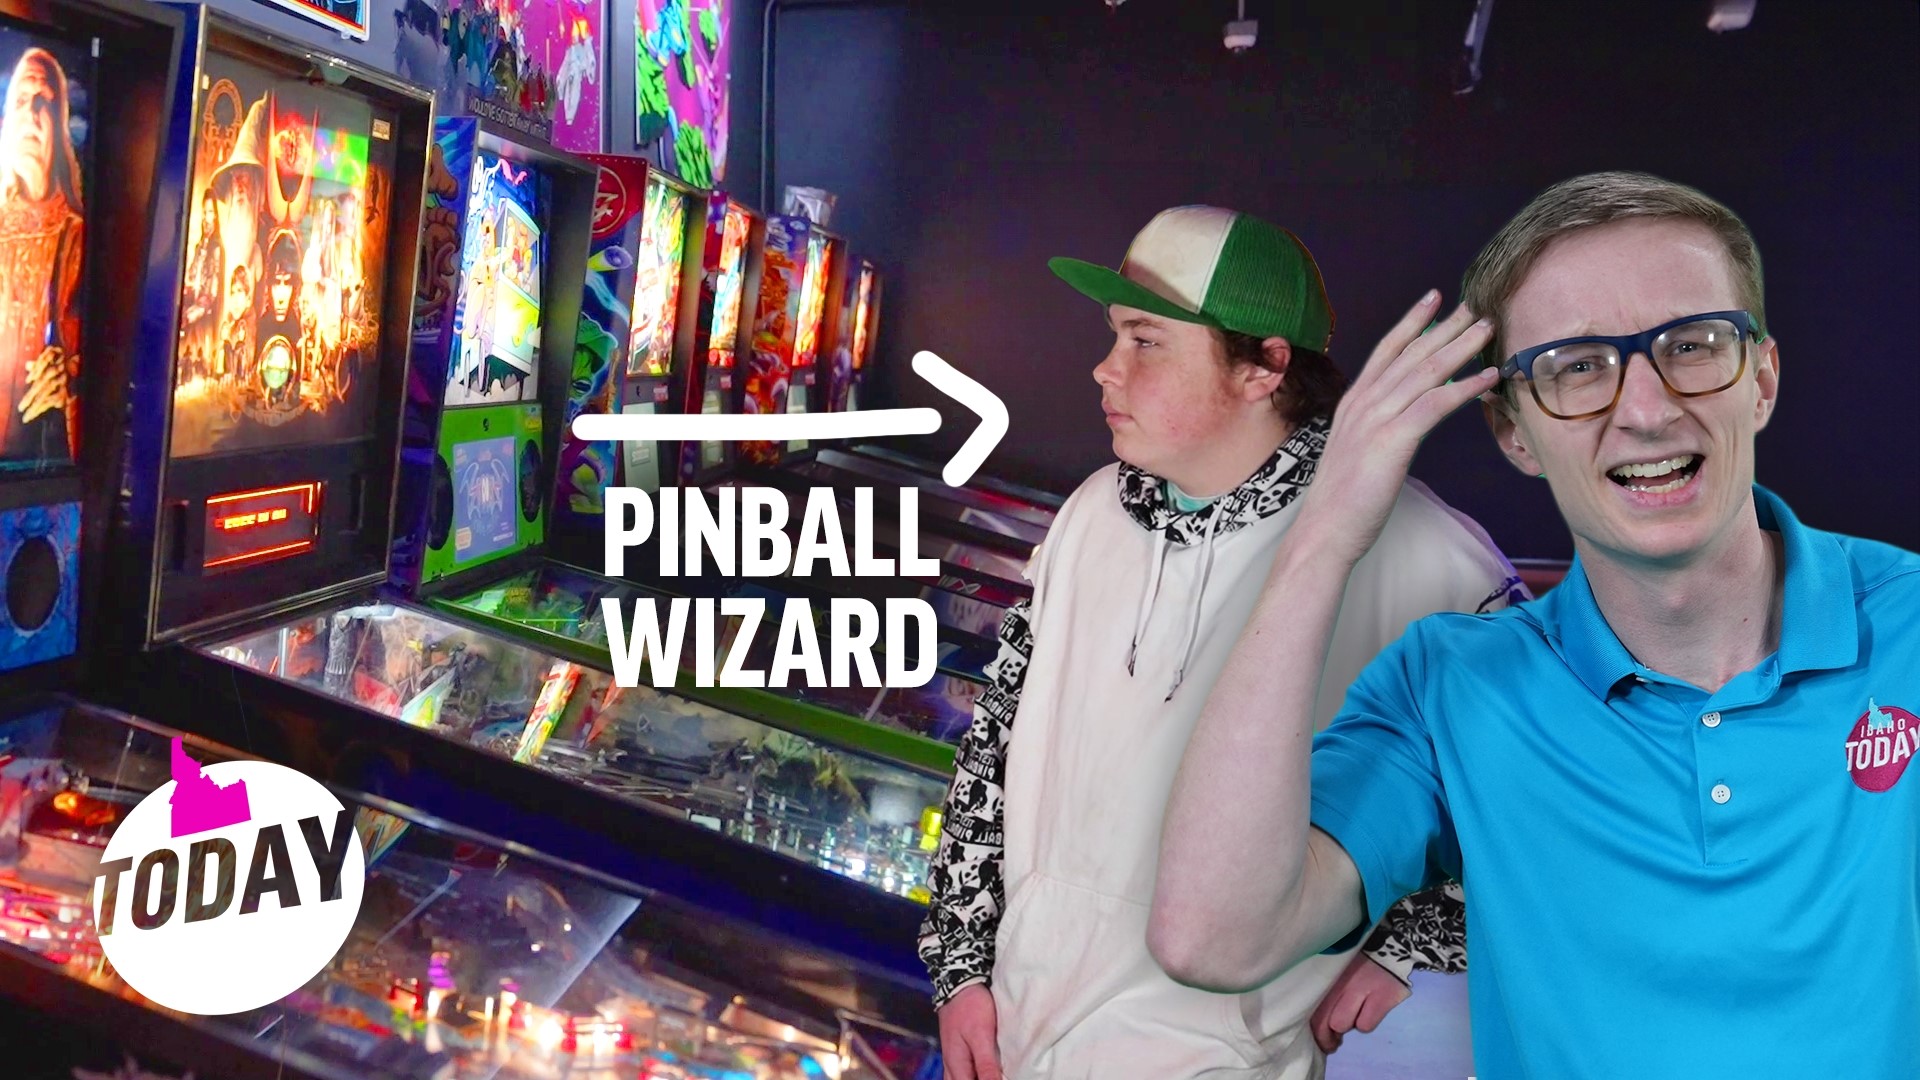 Xyren Silvers is Idaho’s top dog when it comes to playing pinball